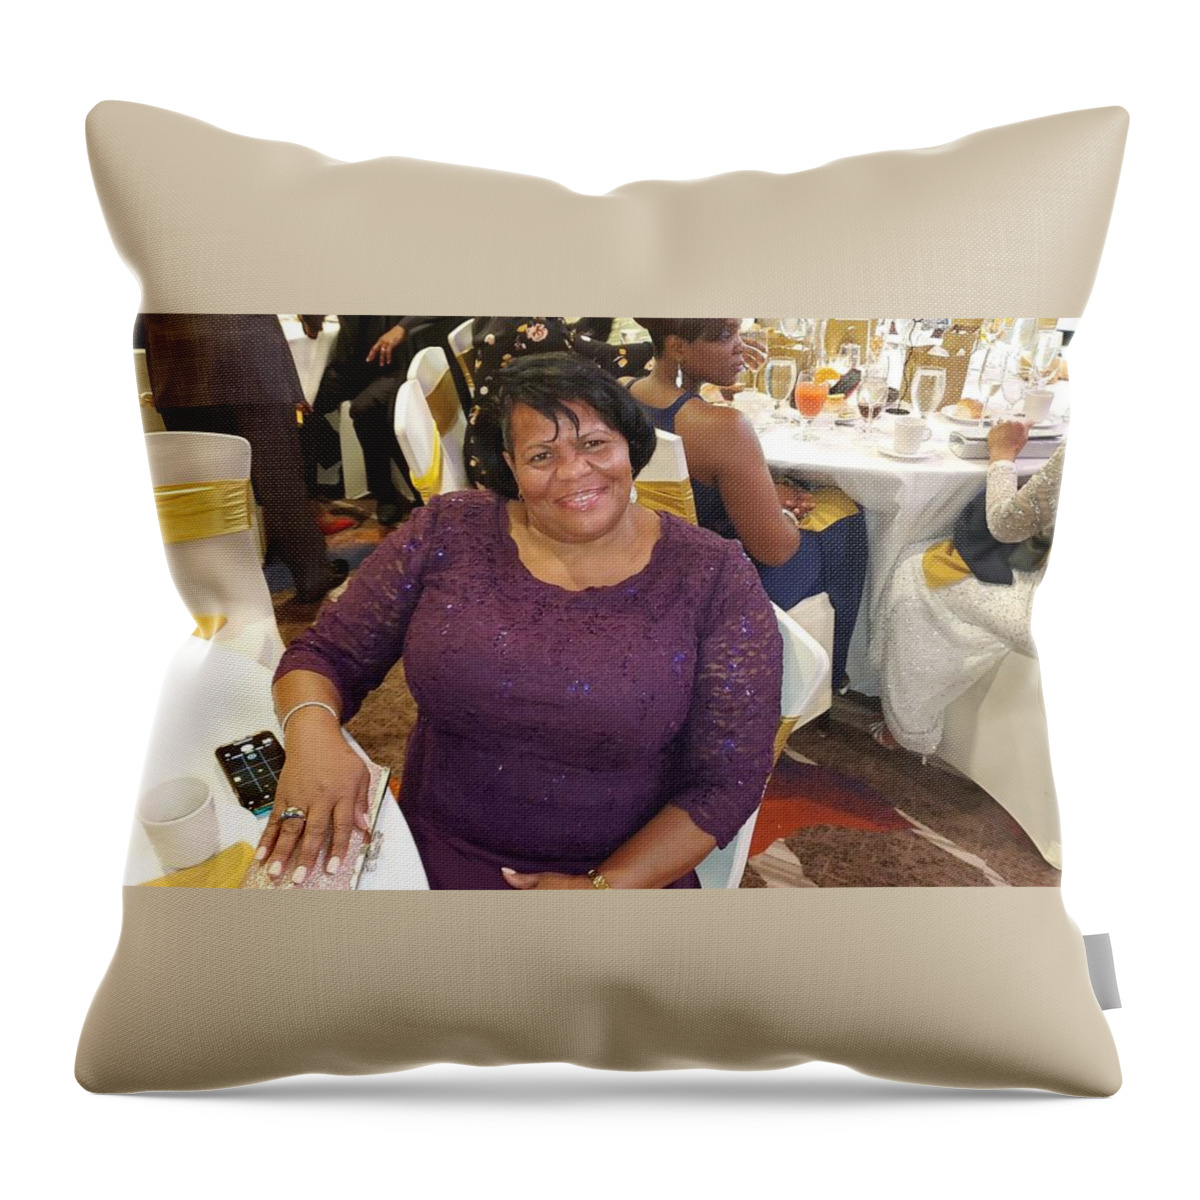  Throw Pillow featuring the photograph Helenia Witter by Trevor A Smith